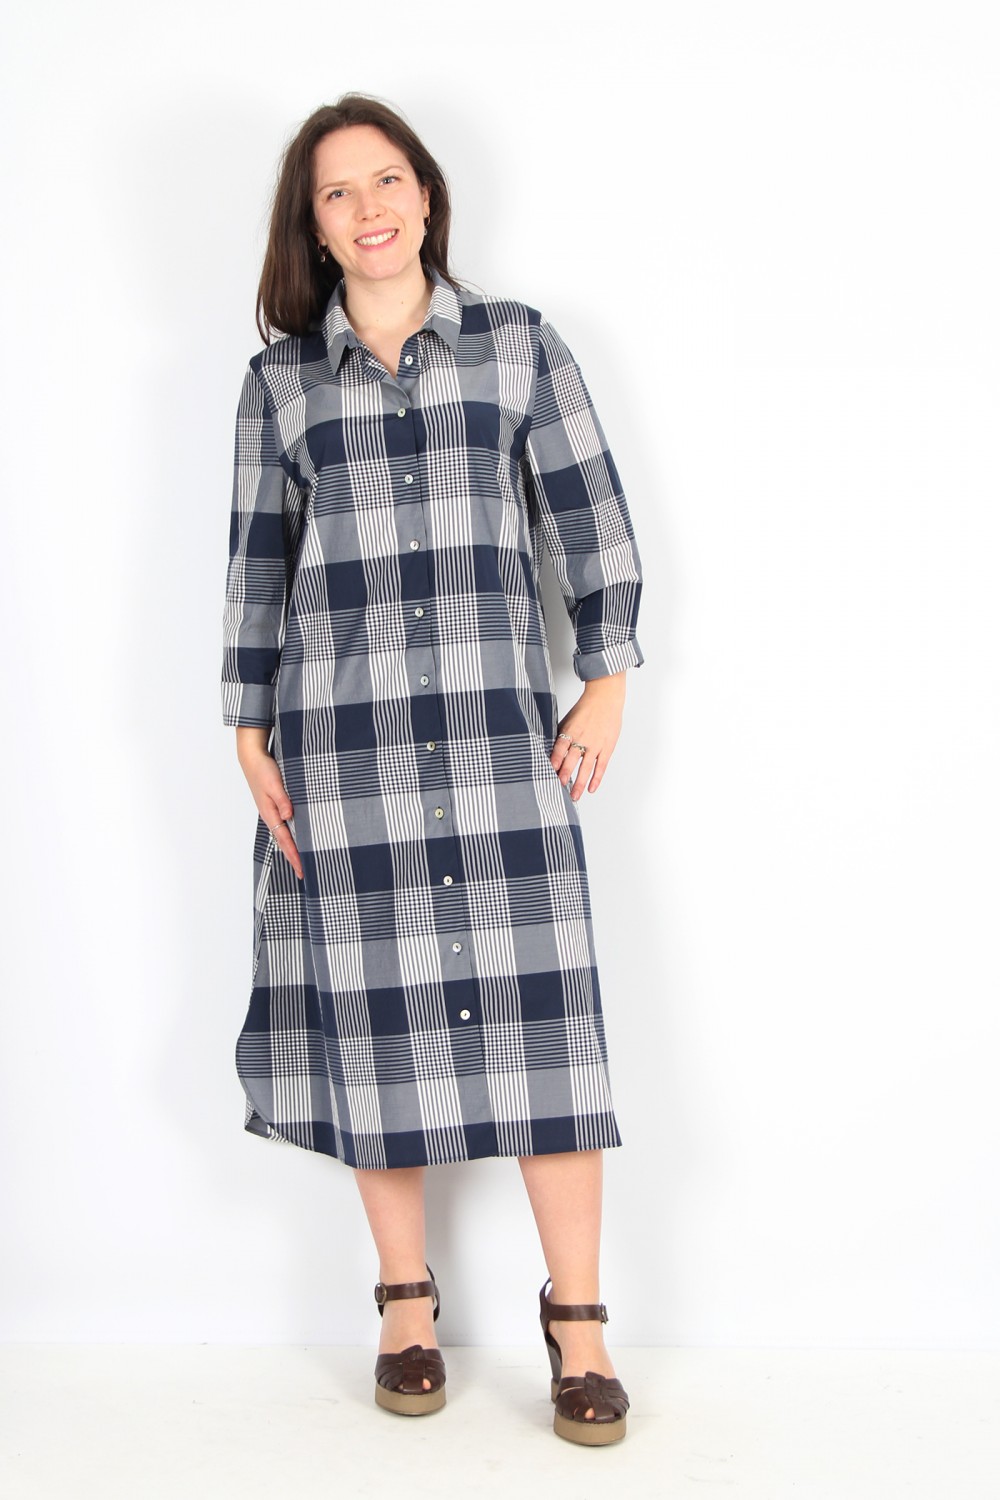 OSKA Dress 431 Night / Cotton Blend with Gingham Check